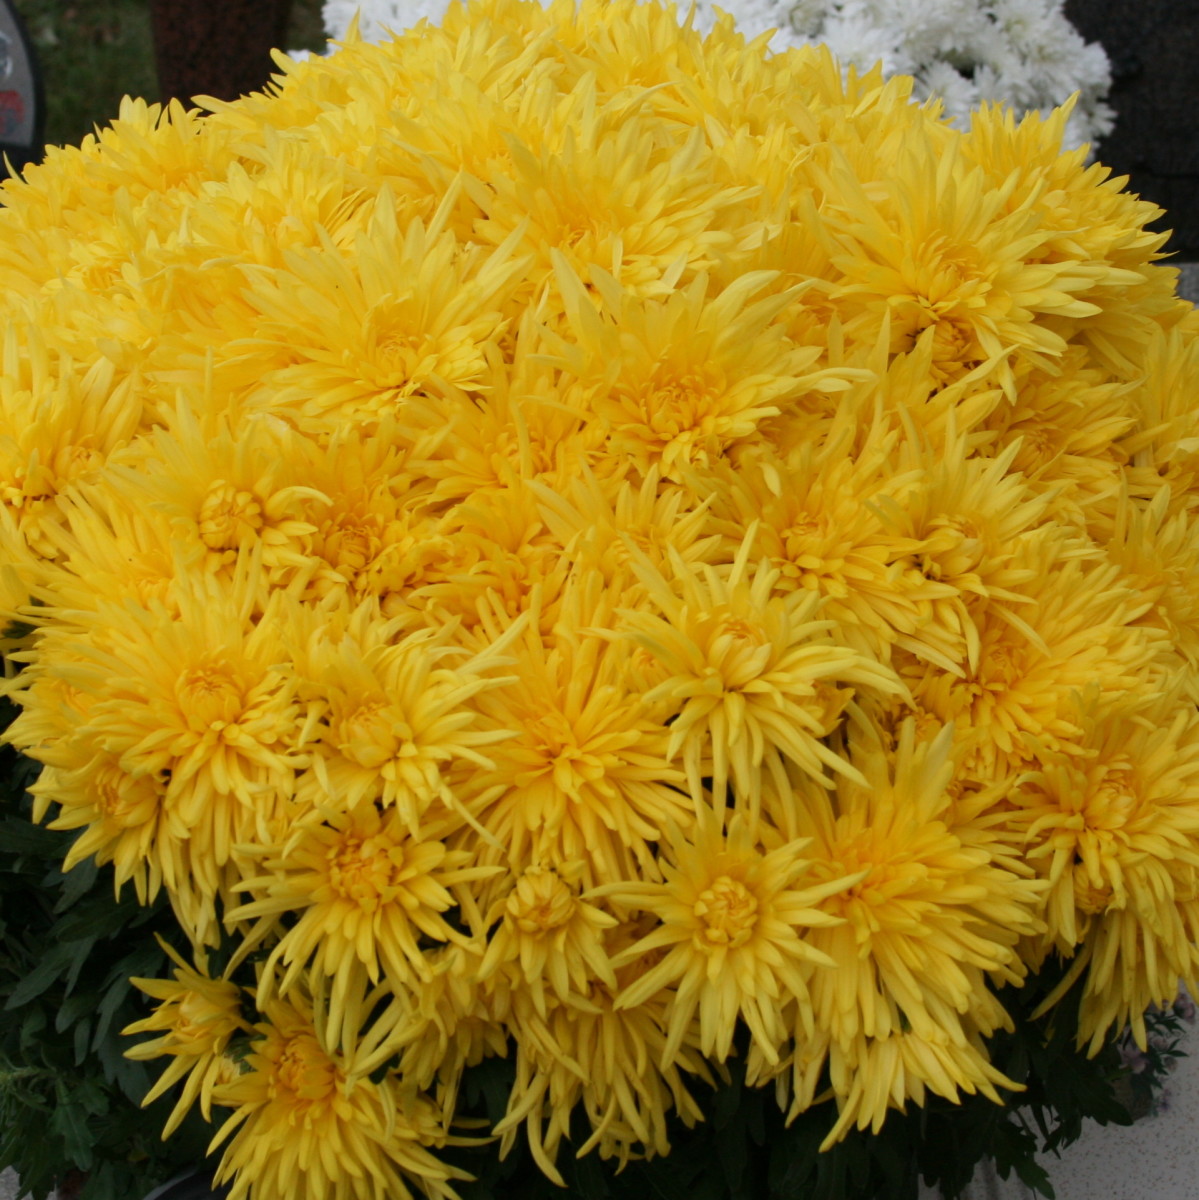 Yellow chrysanthemums are a Toussaint staple.